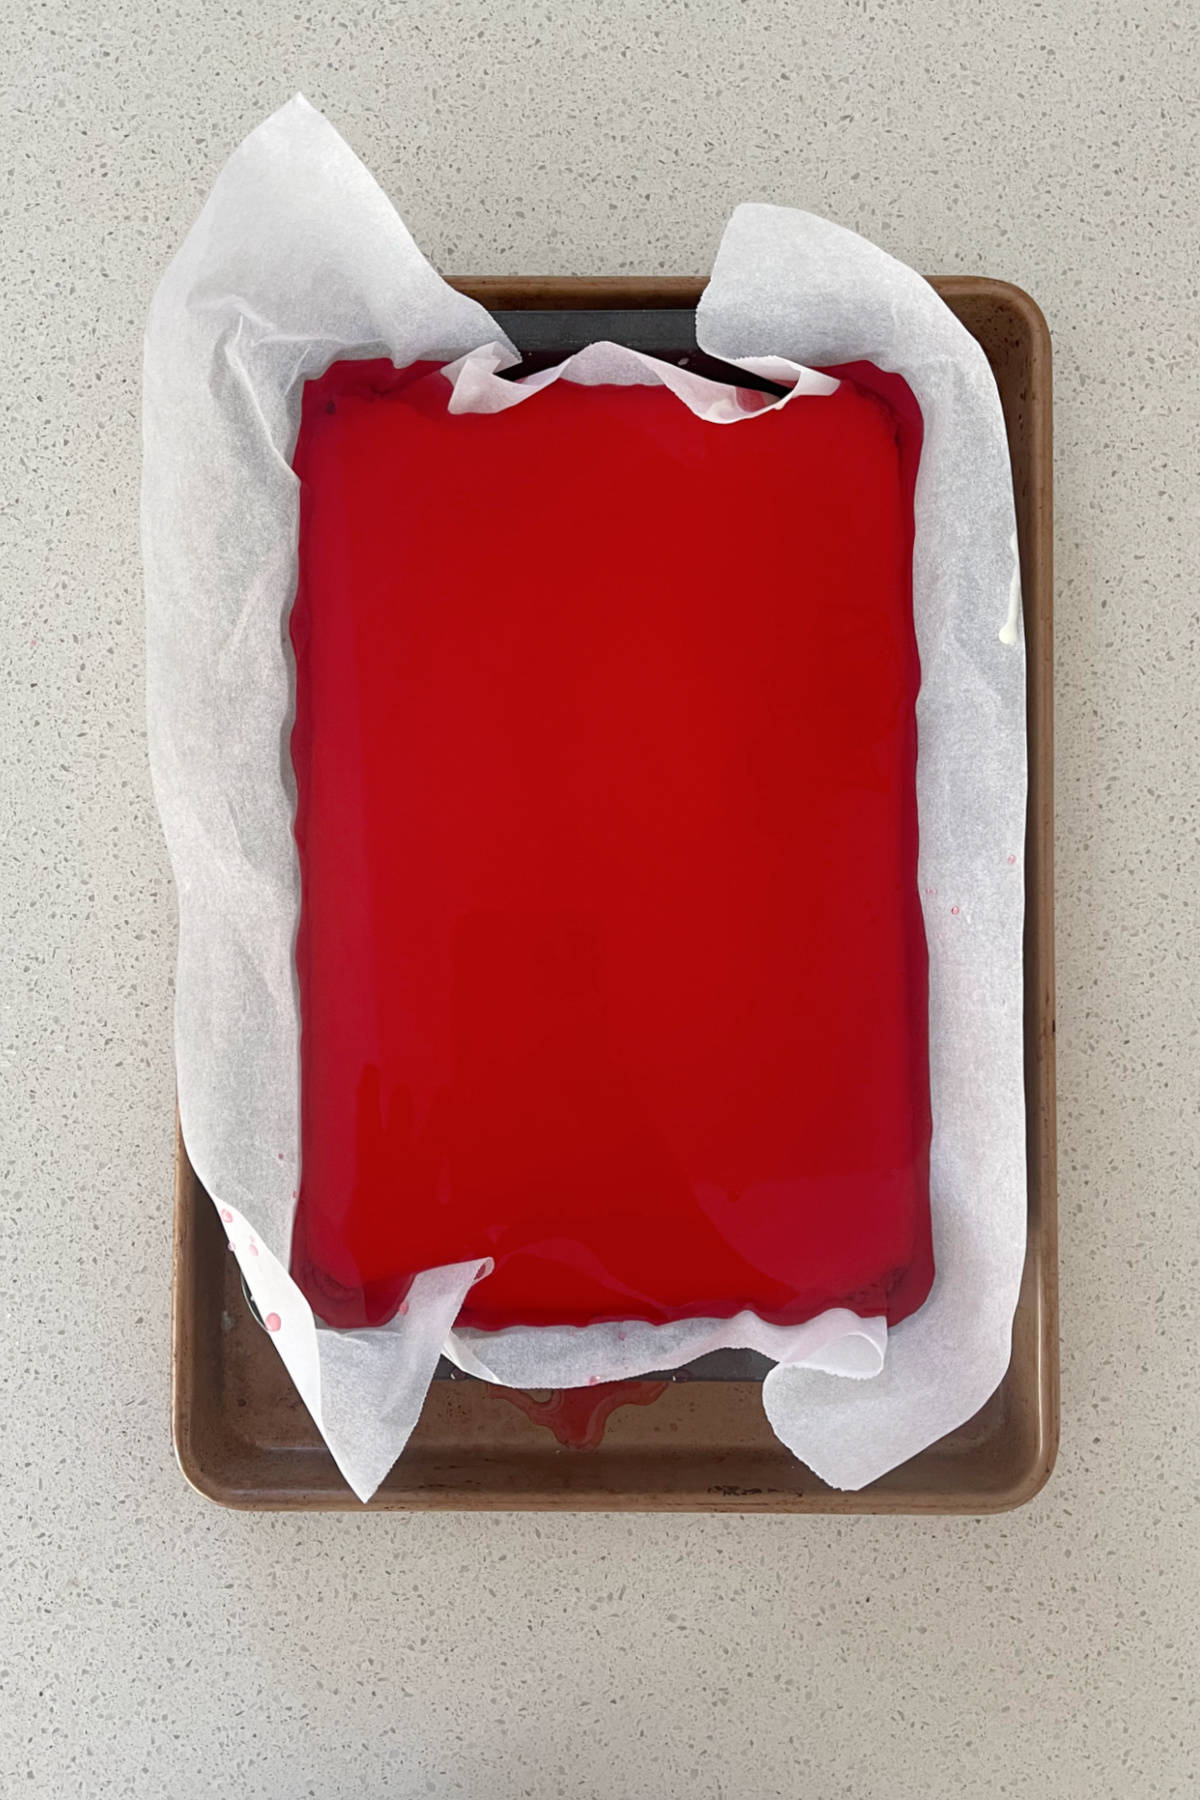 Jelly Slice sitting on a tray ready to go into the fridge.